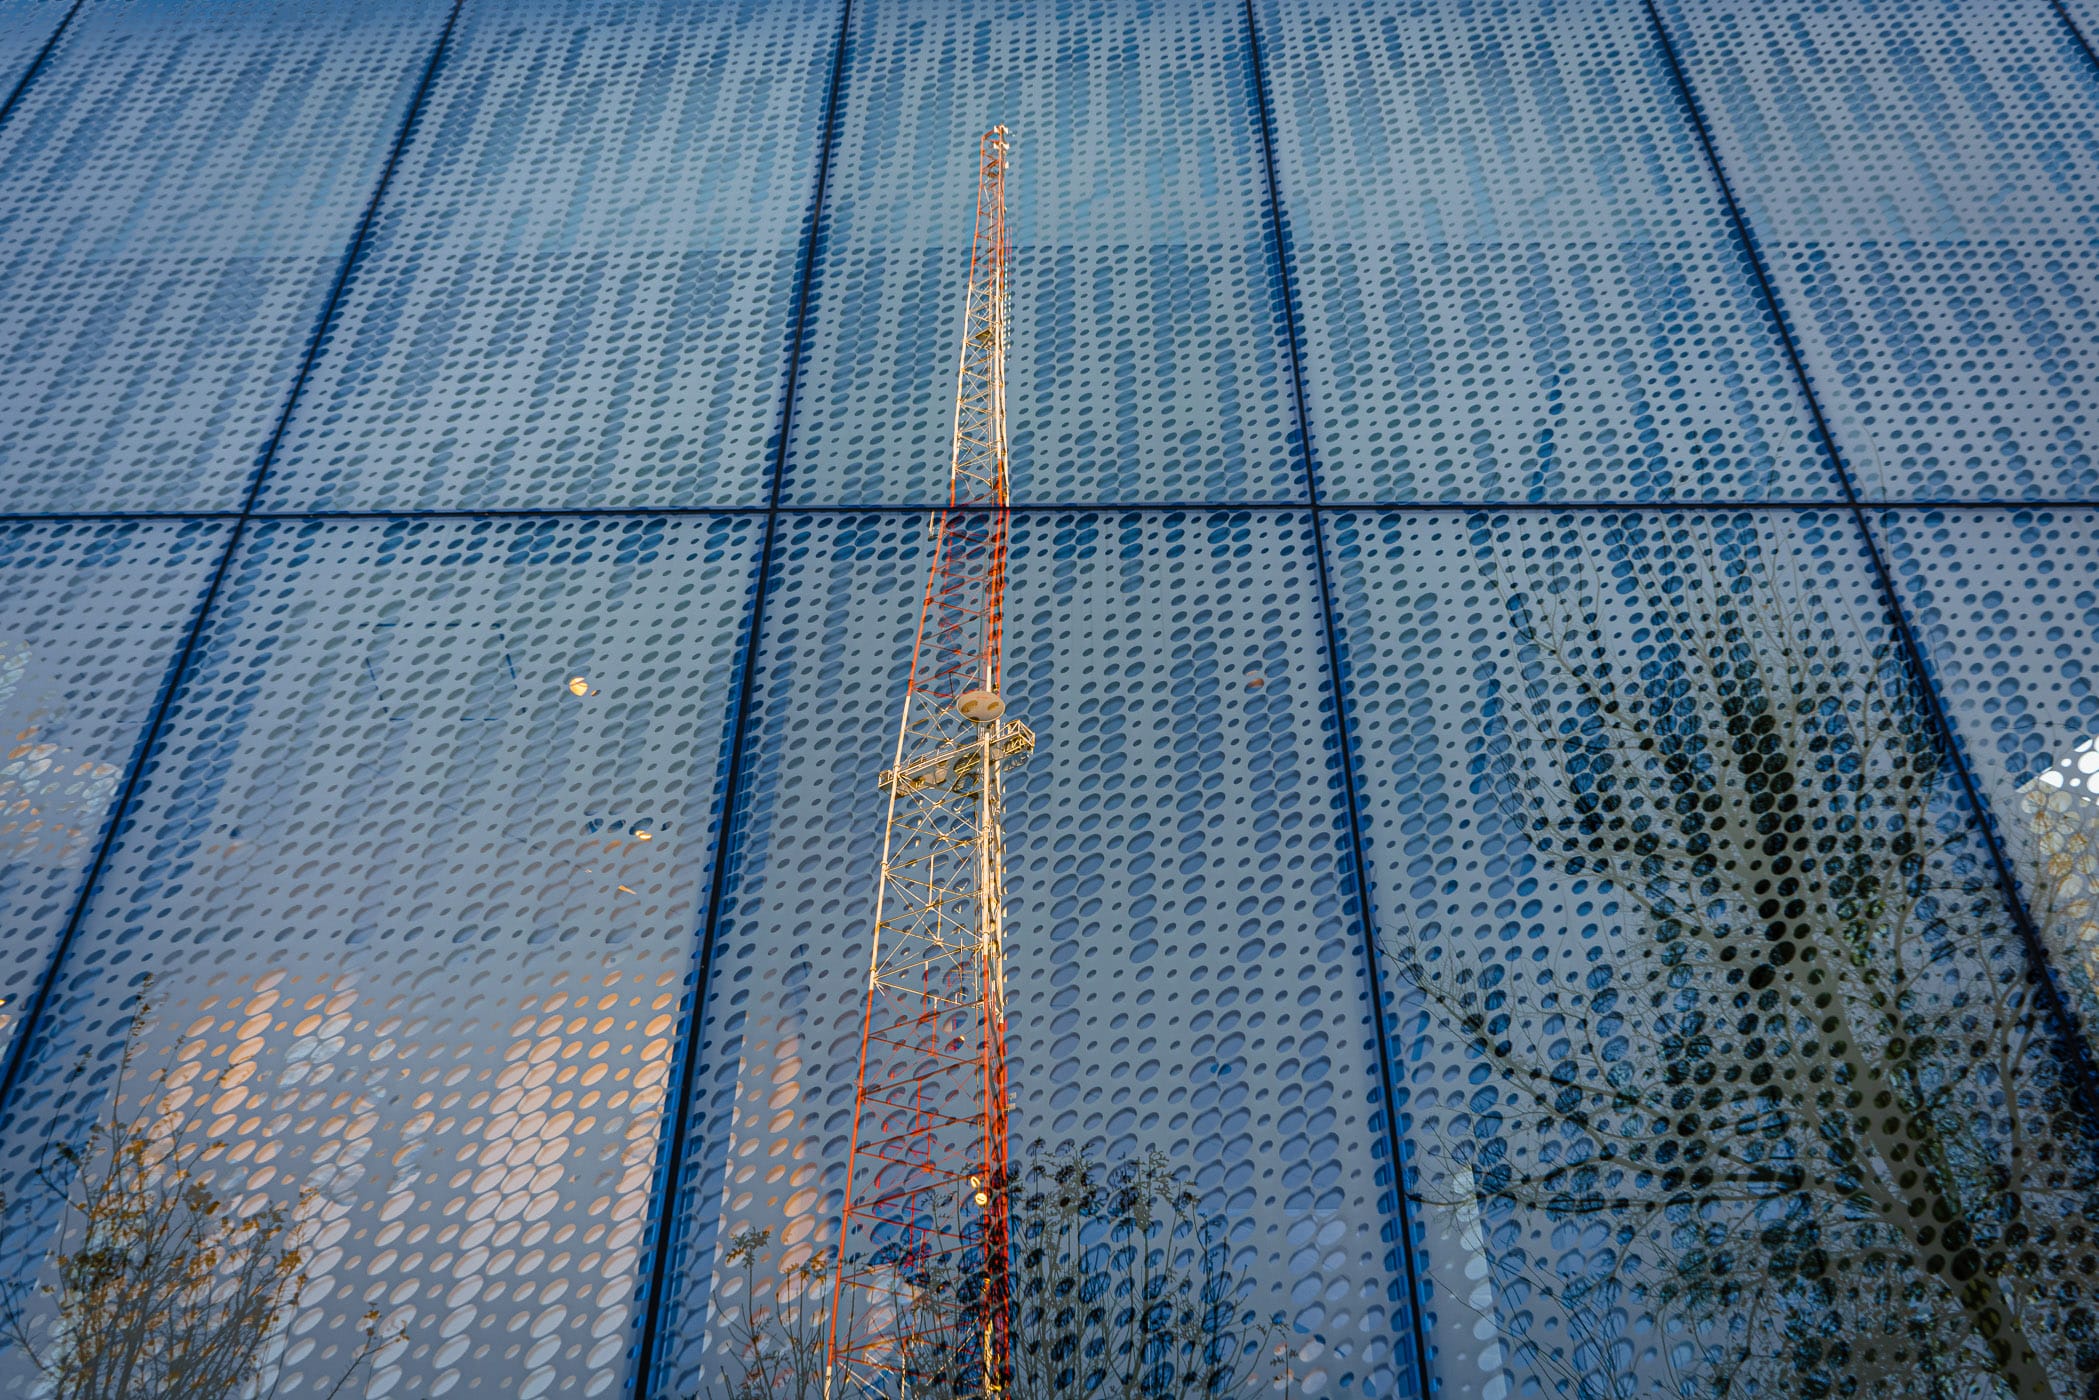 A nearby broadcast tower is reflected in the glass exterior of San Antonio's Tobin Center for the Performing Arts.